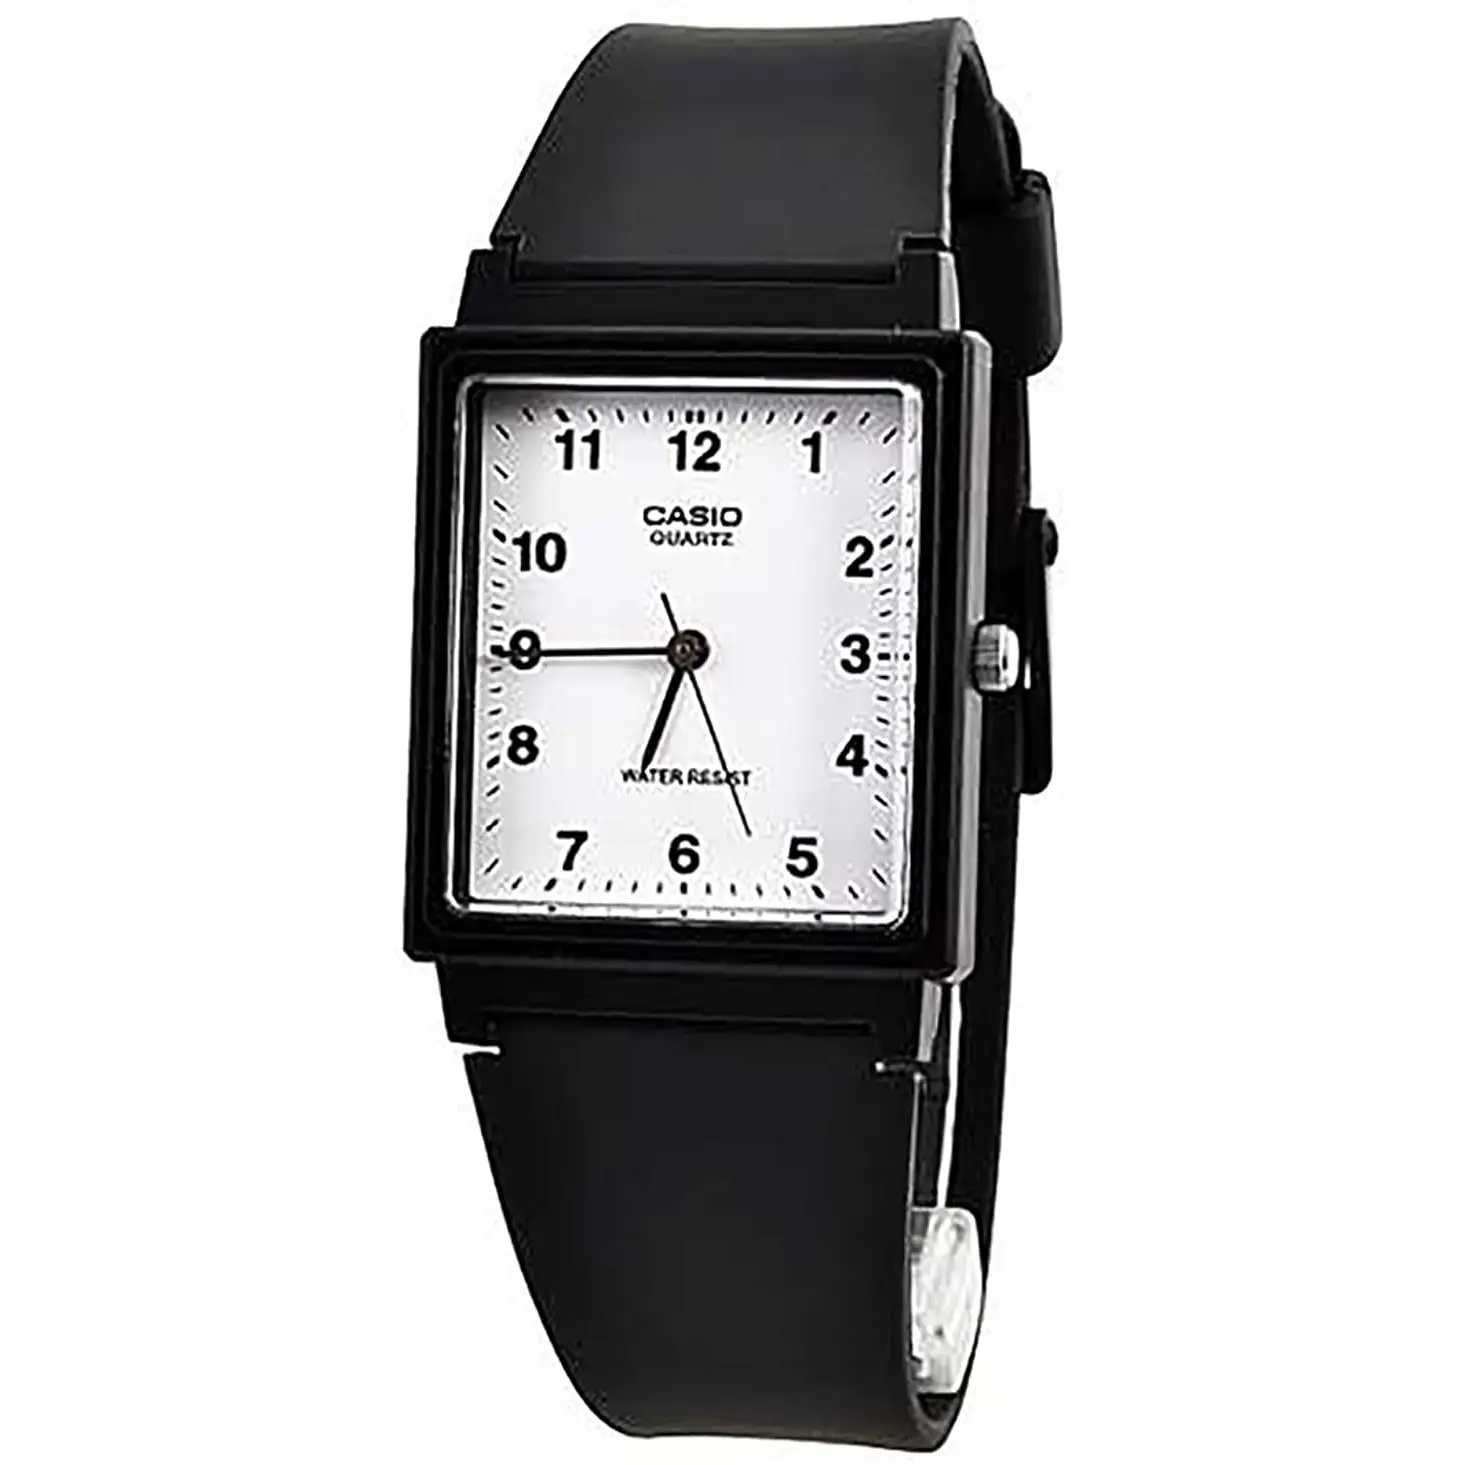 Casio General Men’s Black Analog with White Dial Watch